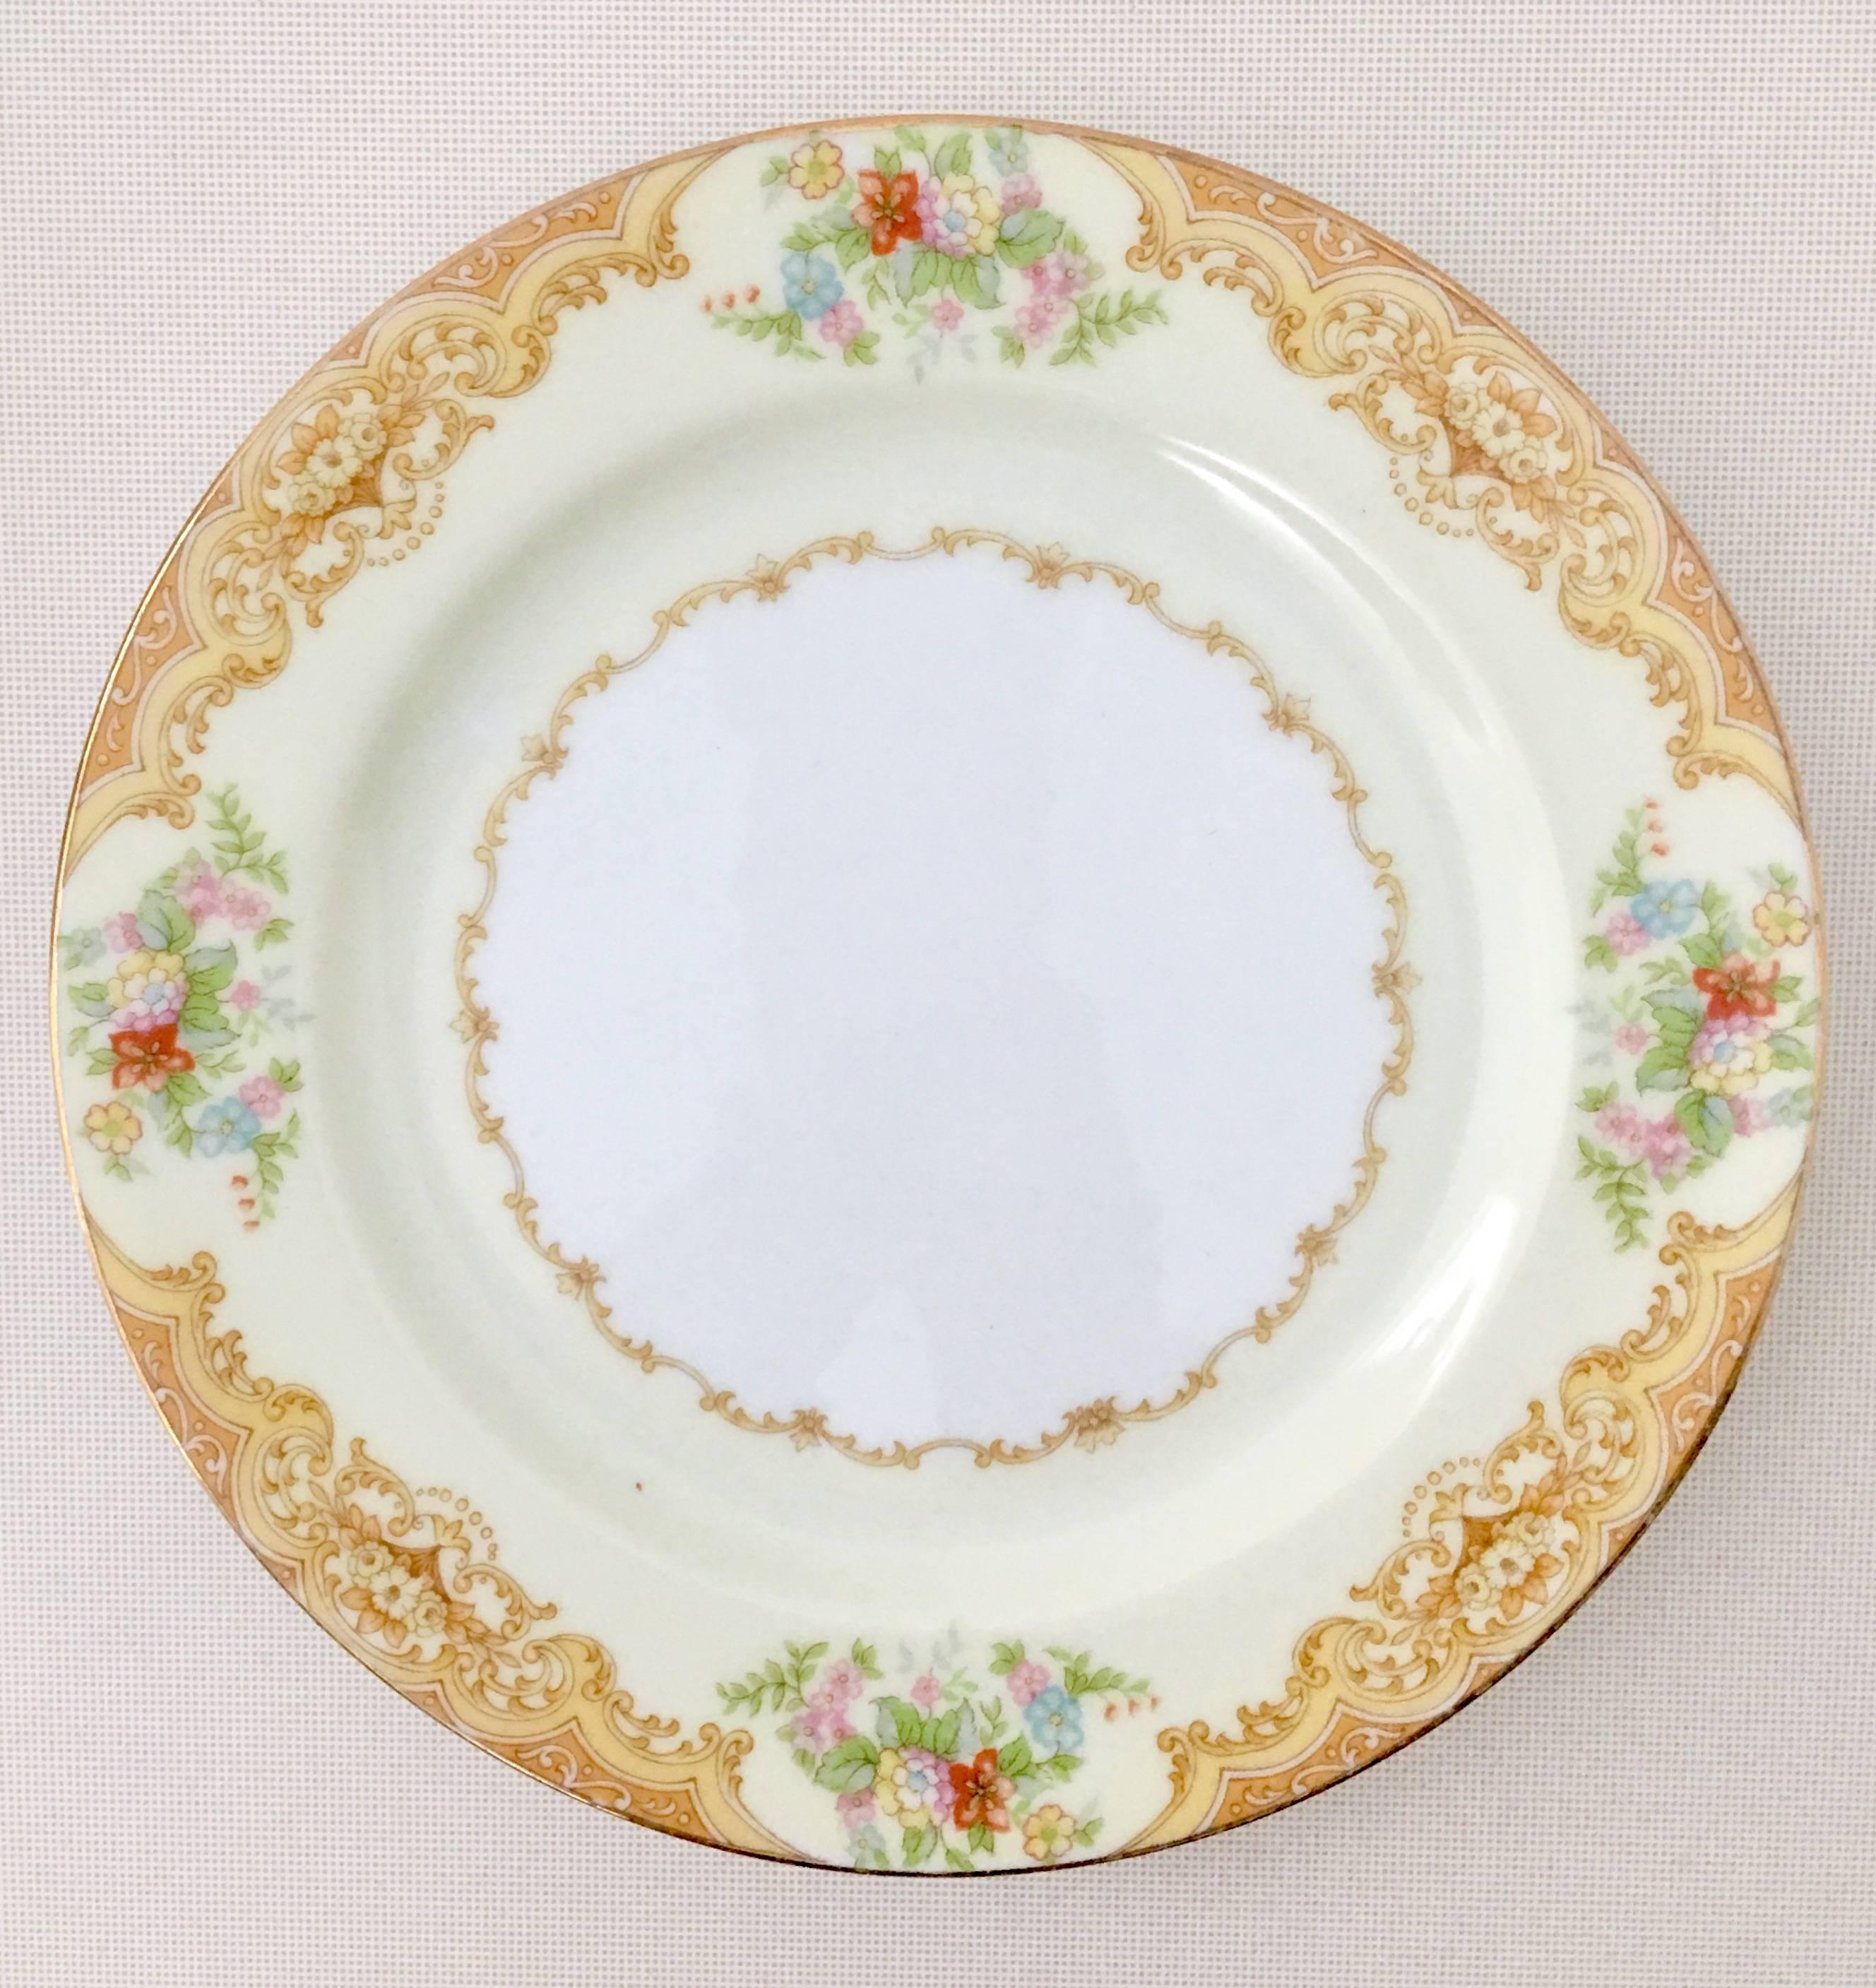 1930'S Art Nouveau hand-painted Japanese porcelain set of ten salad/dessert plates by, Noritake-Morimura Brothers. Pattern features a golden paisley and scroll rim pattern over a band of creamy yellow with a 22-karat gold edge detail. Each piece